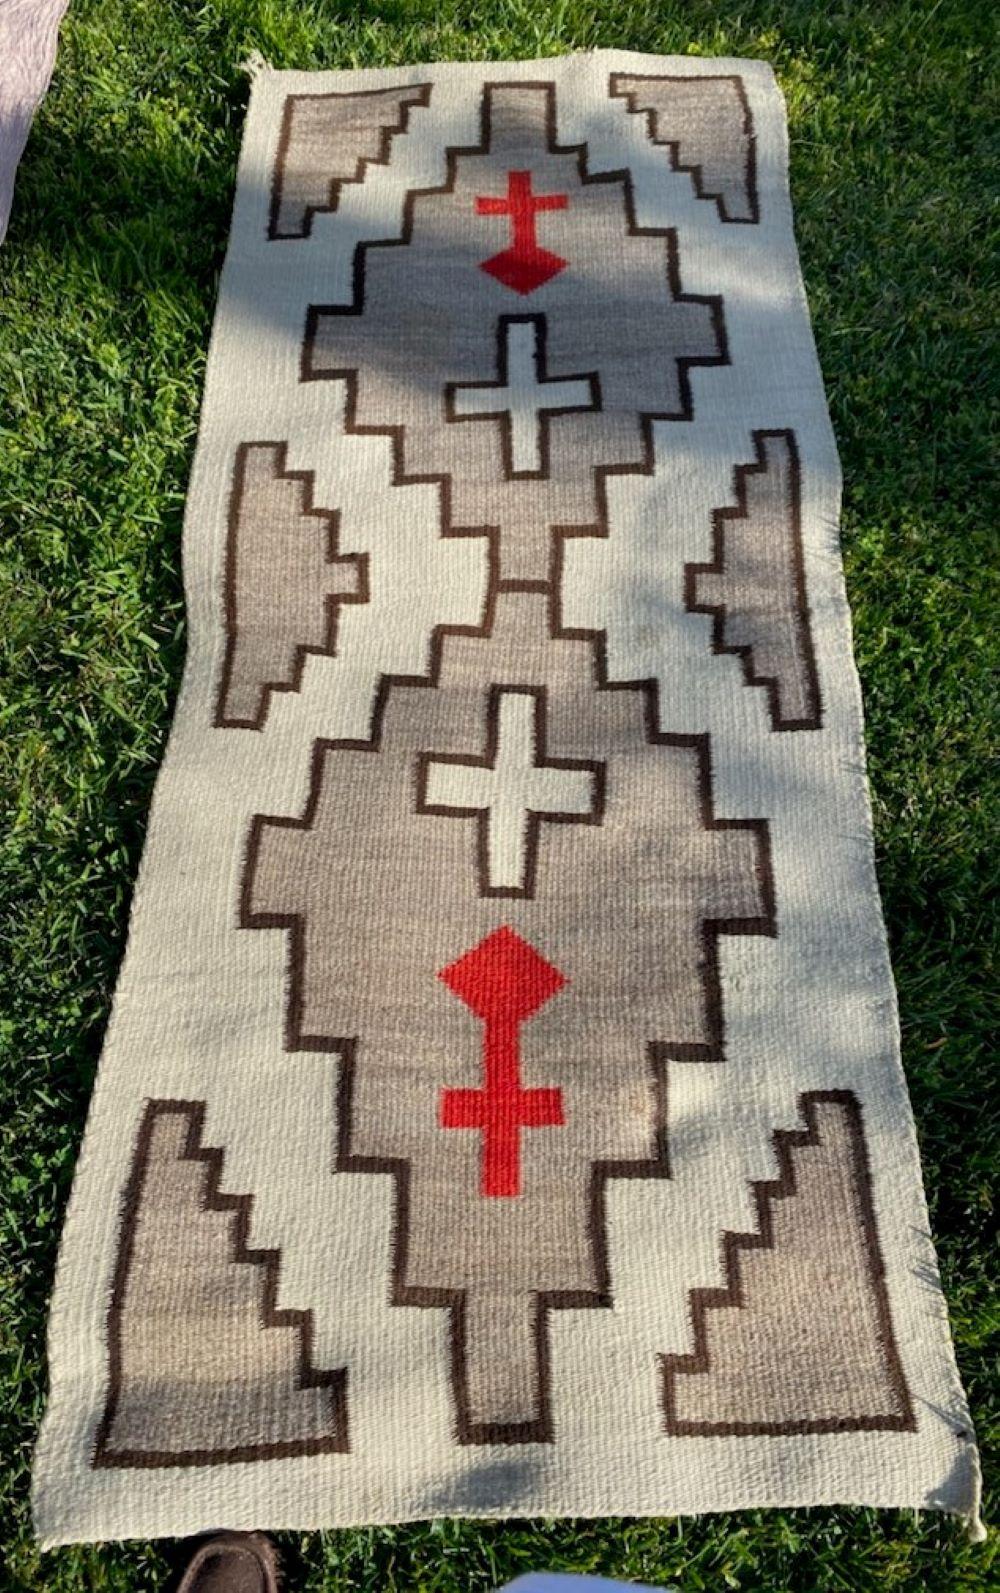 This fine Navajo Runner rug is in fine condition and has crosses and arrows. Amazing size and simple colors.